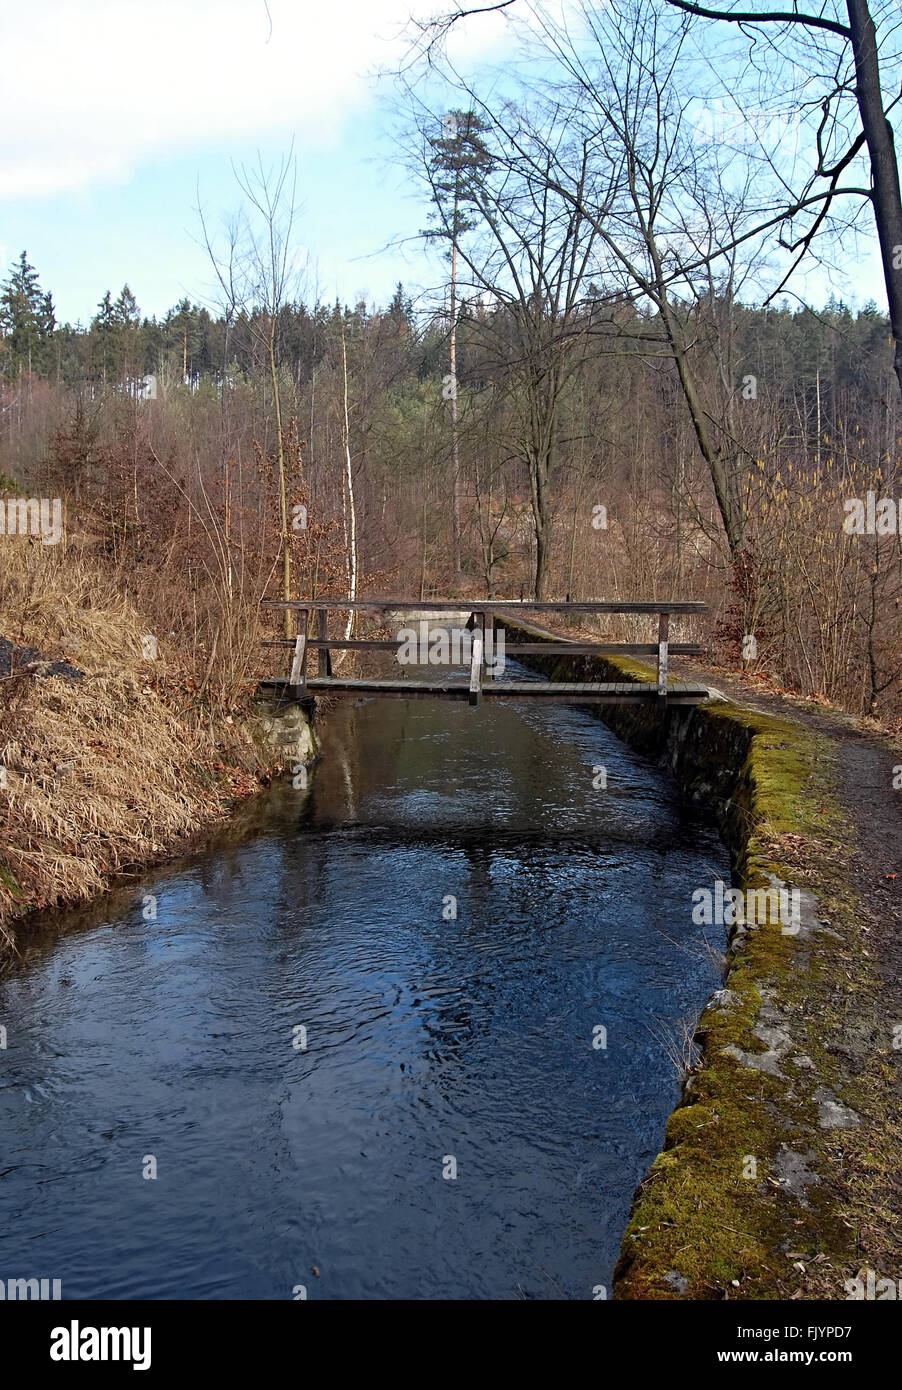 technical monument Weisshuhnuv kanal water channel with small wooden bridge near Hradec nad Moravici Stock Photo